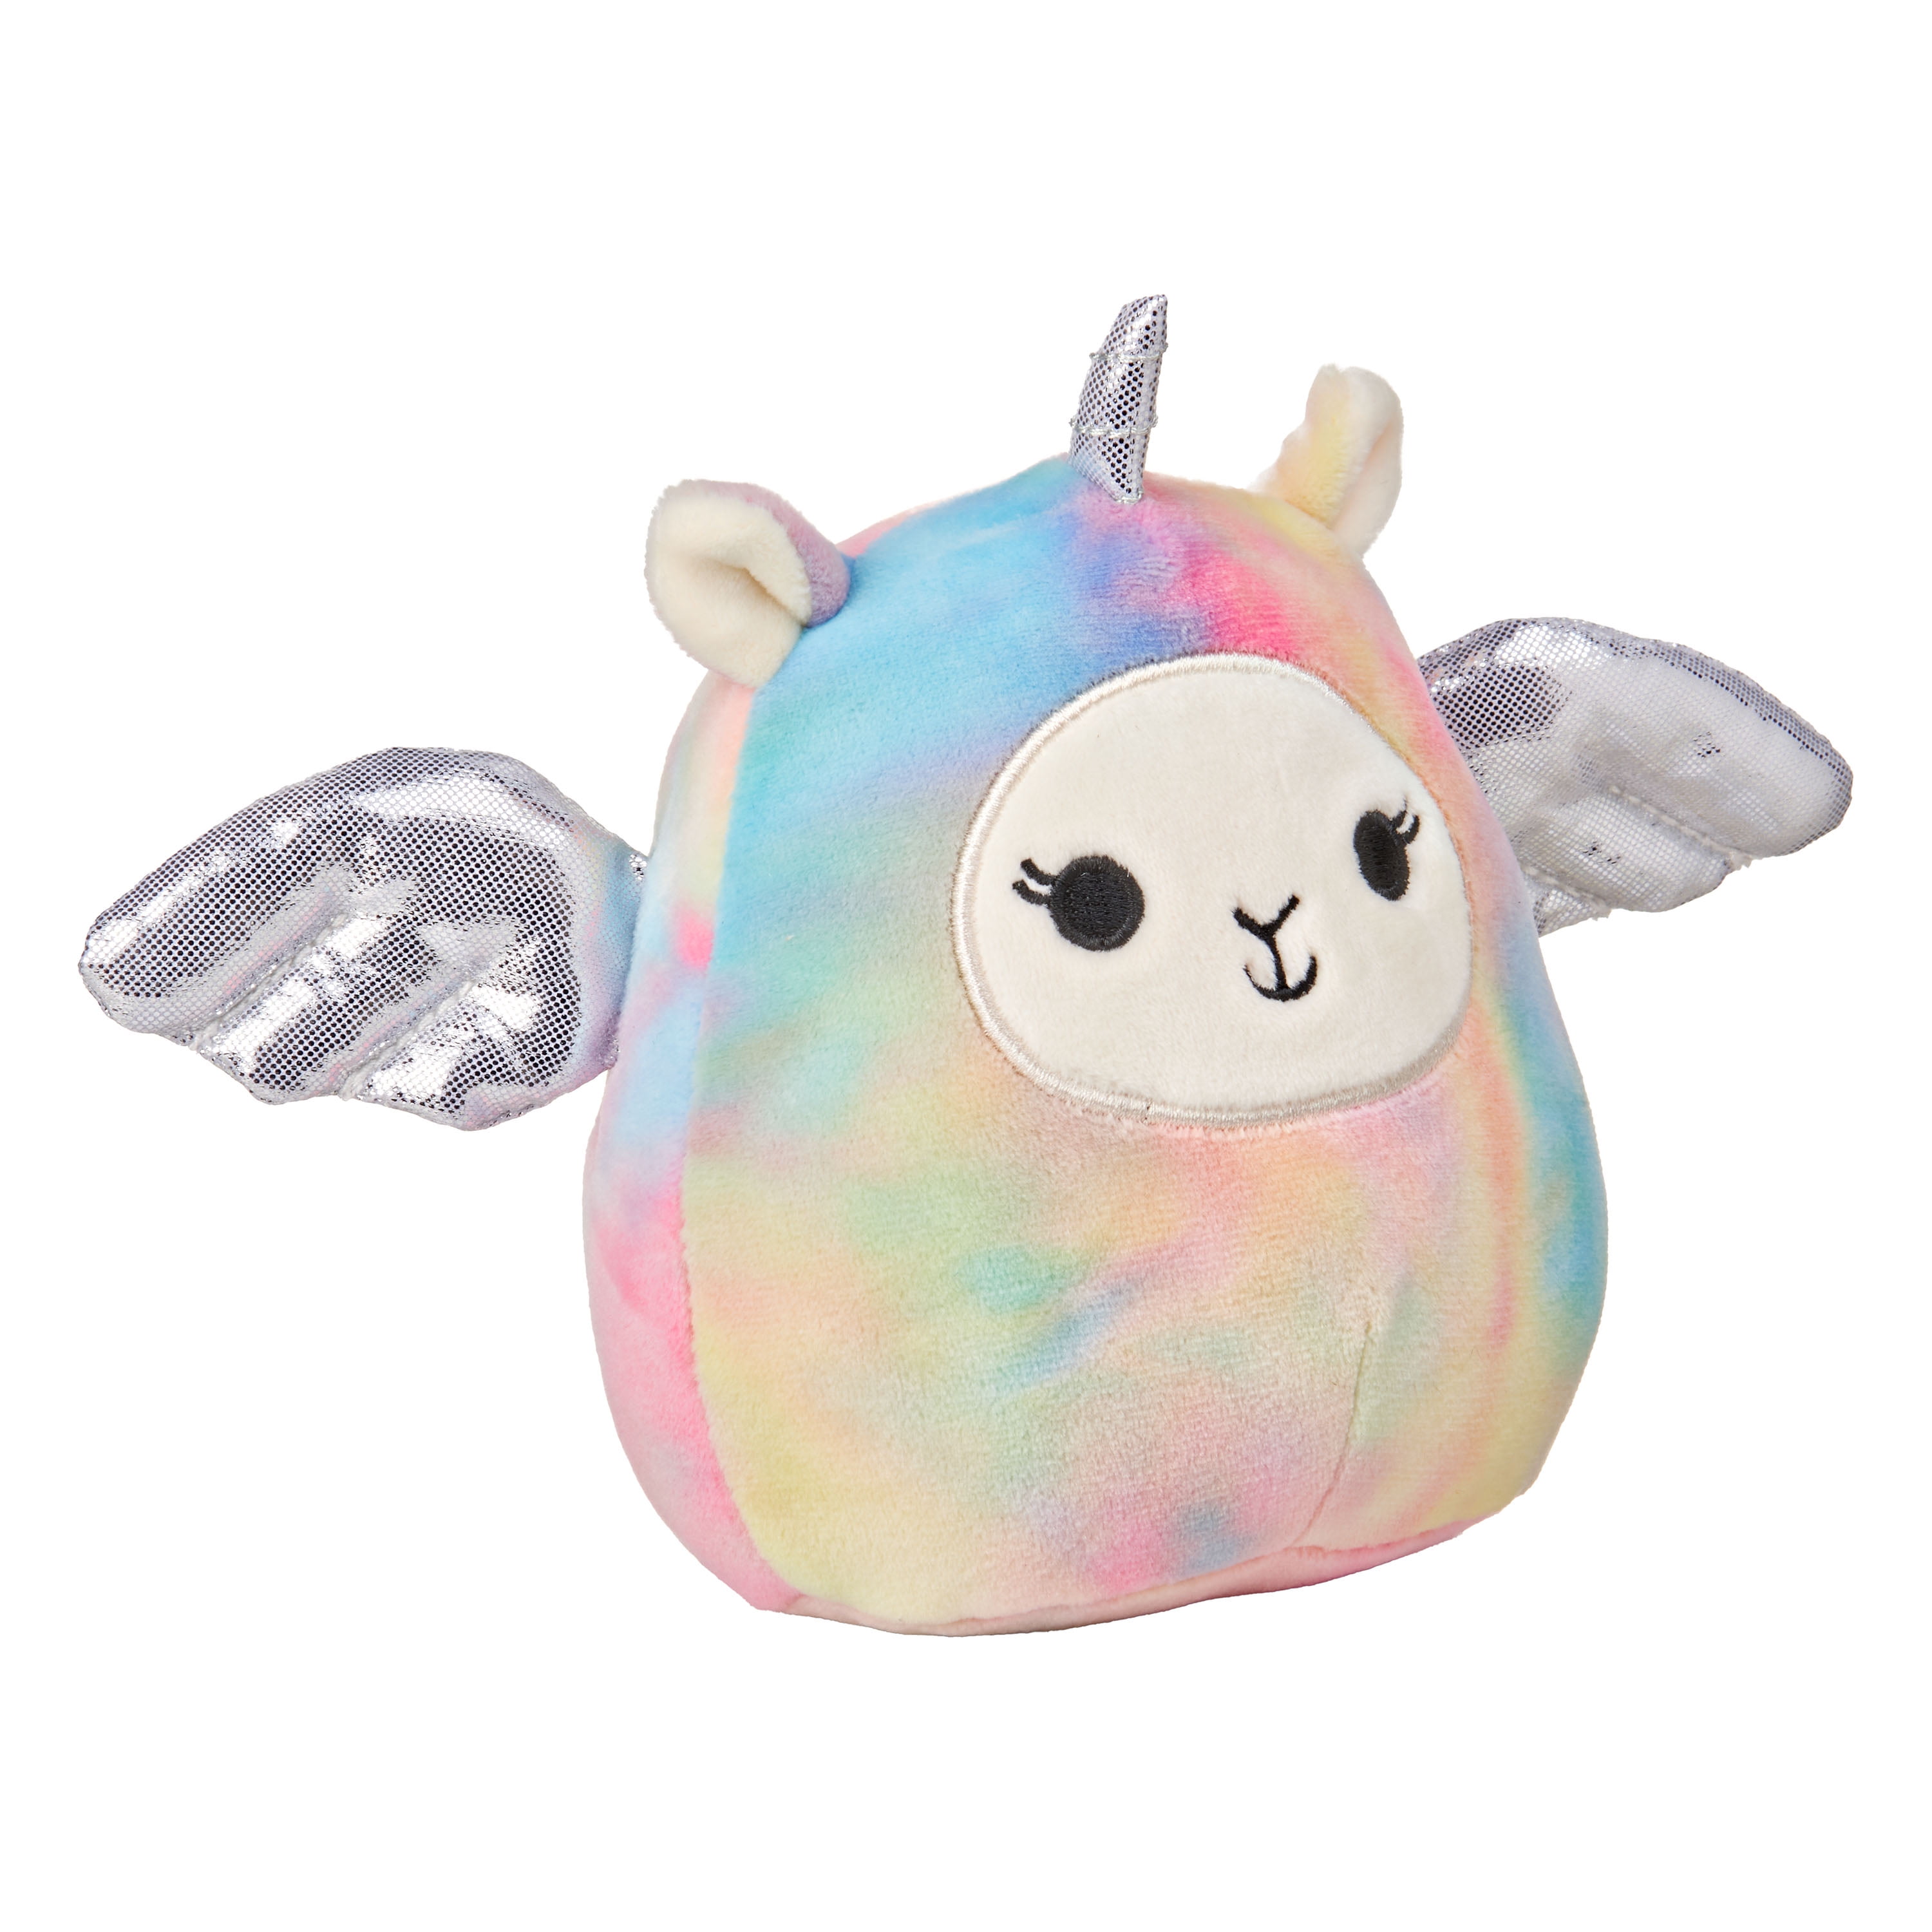 Squishmallow 11" Lucy-may Tie Dyed Llama Pegacorn Plush Pillow Kellytoy 2020 for sale online